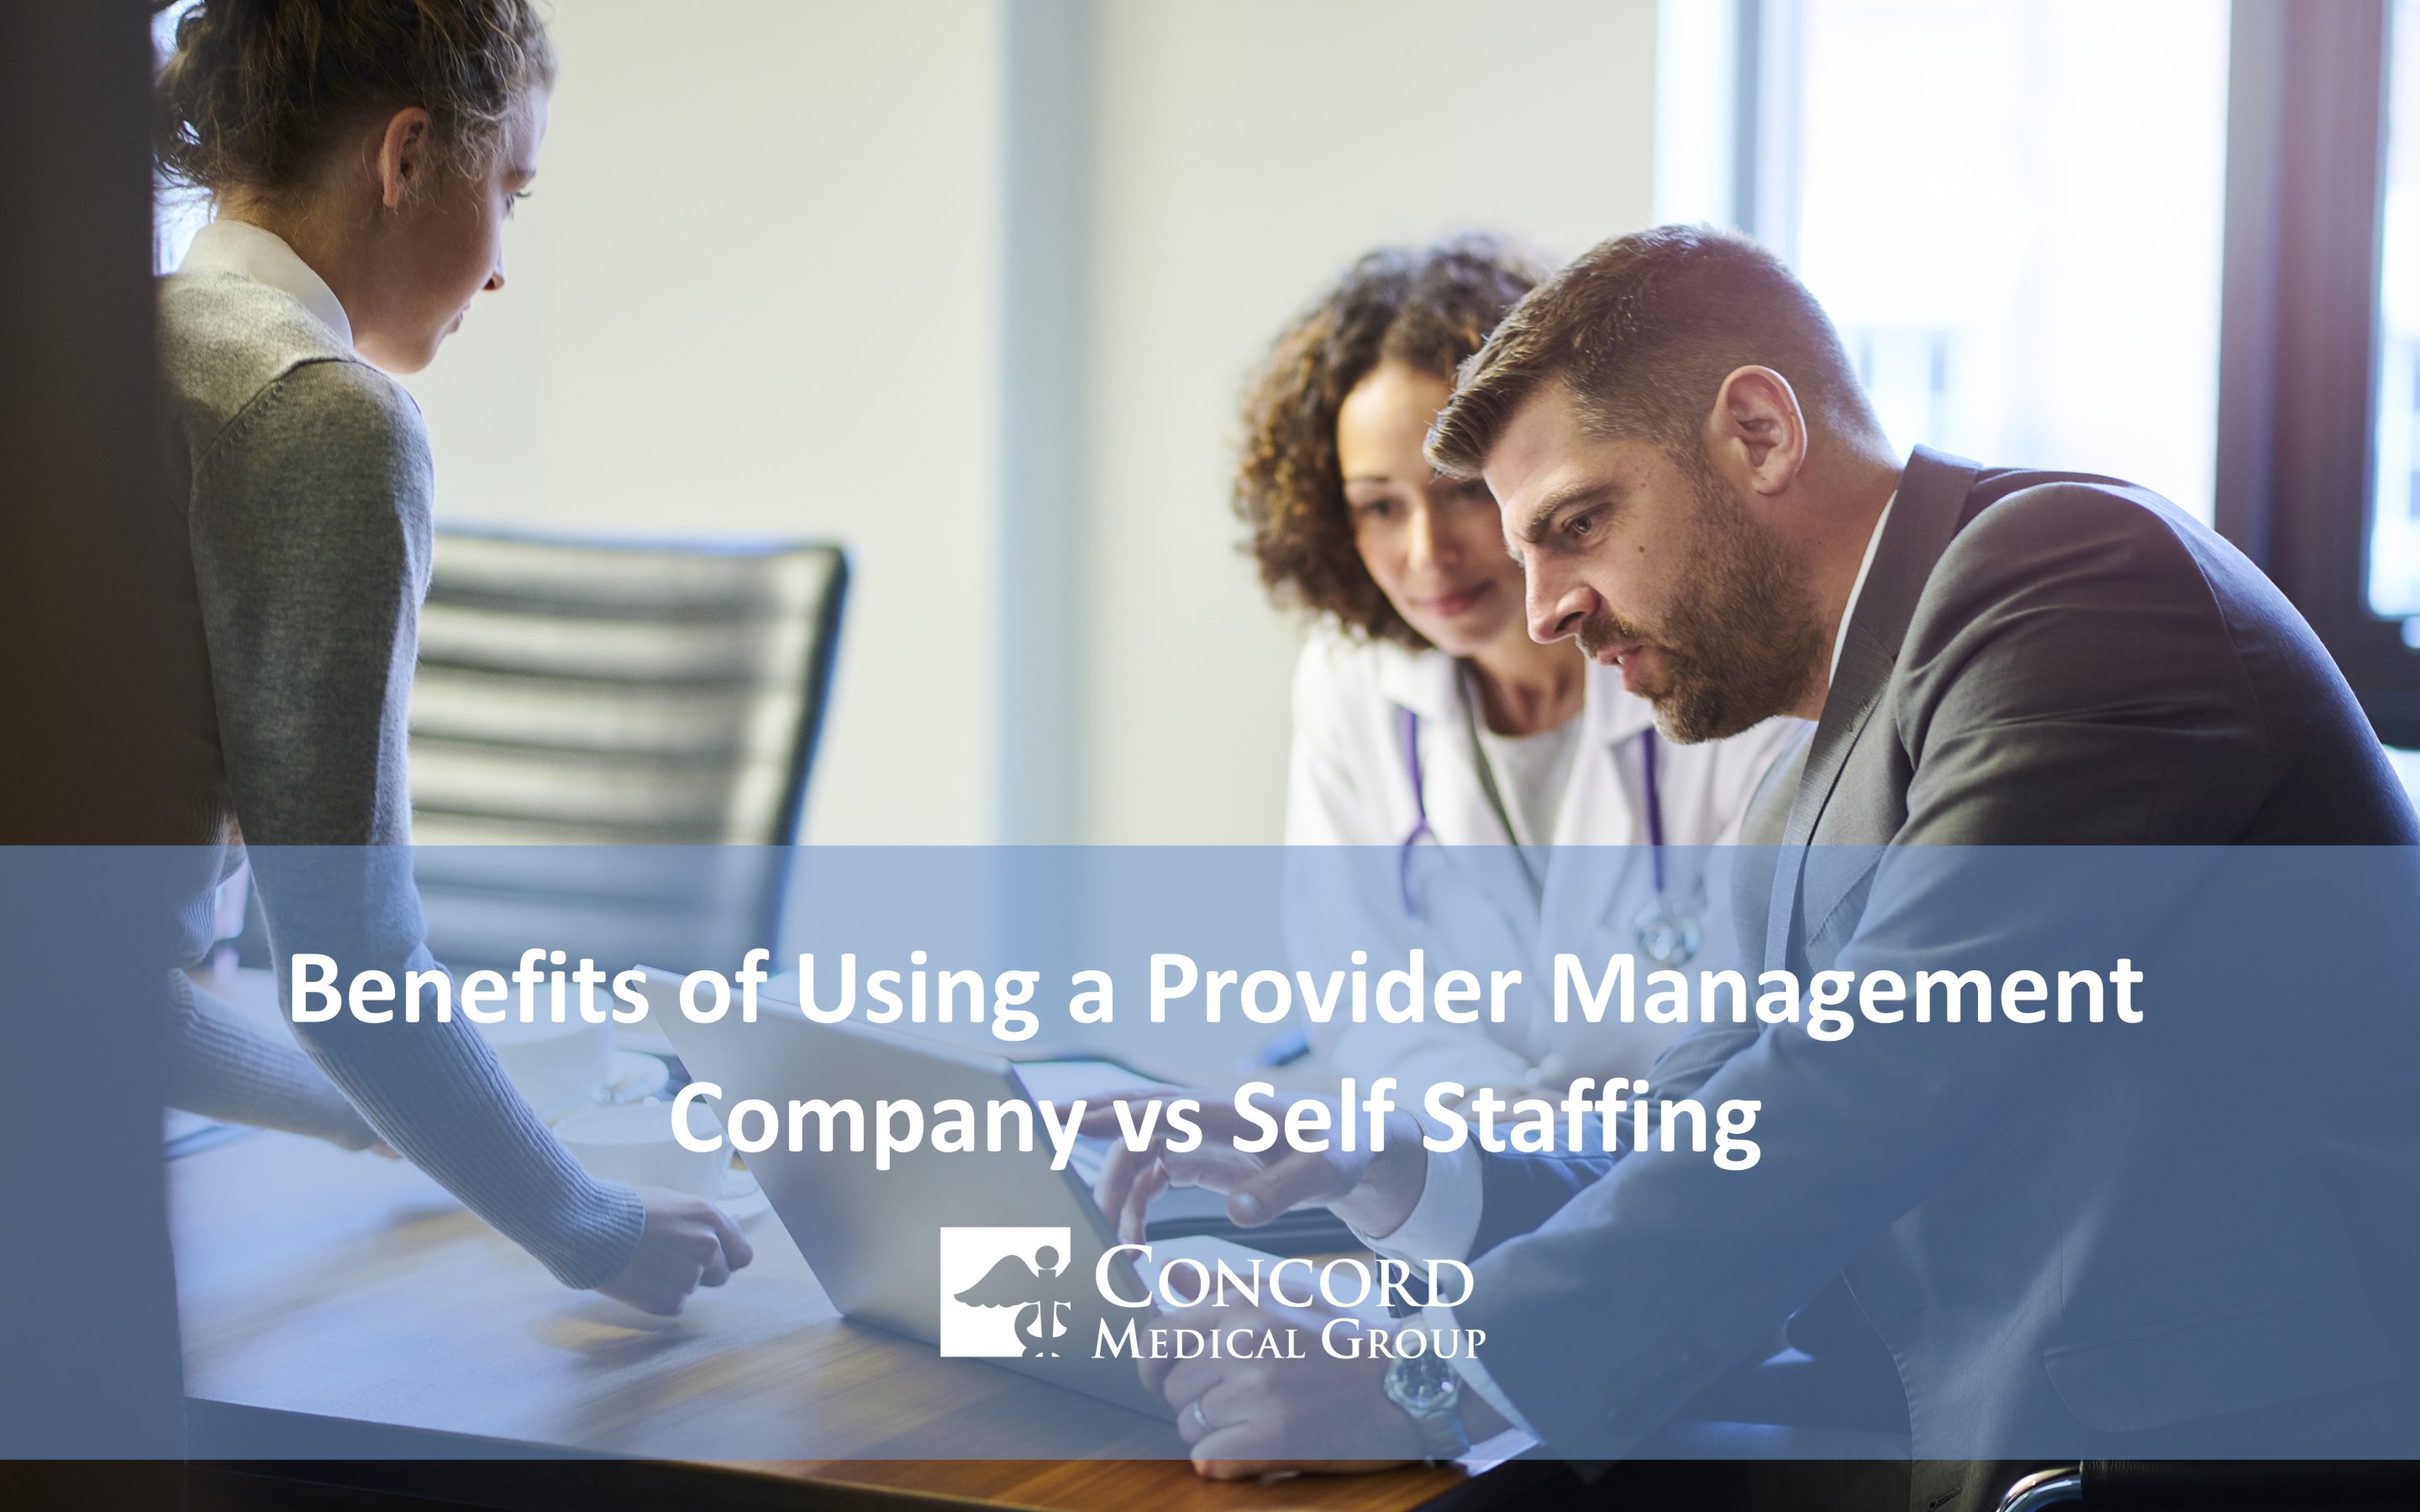 Benefits of Using a Provider Management Company vs Self Staffing